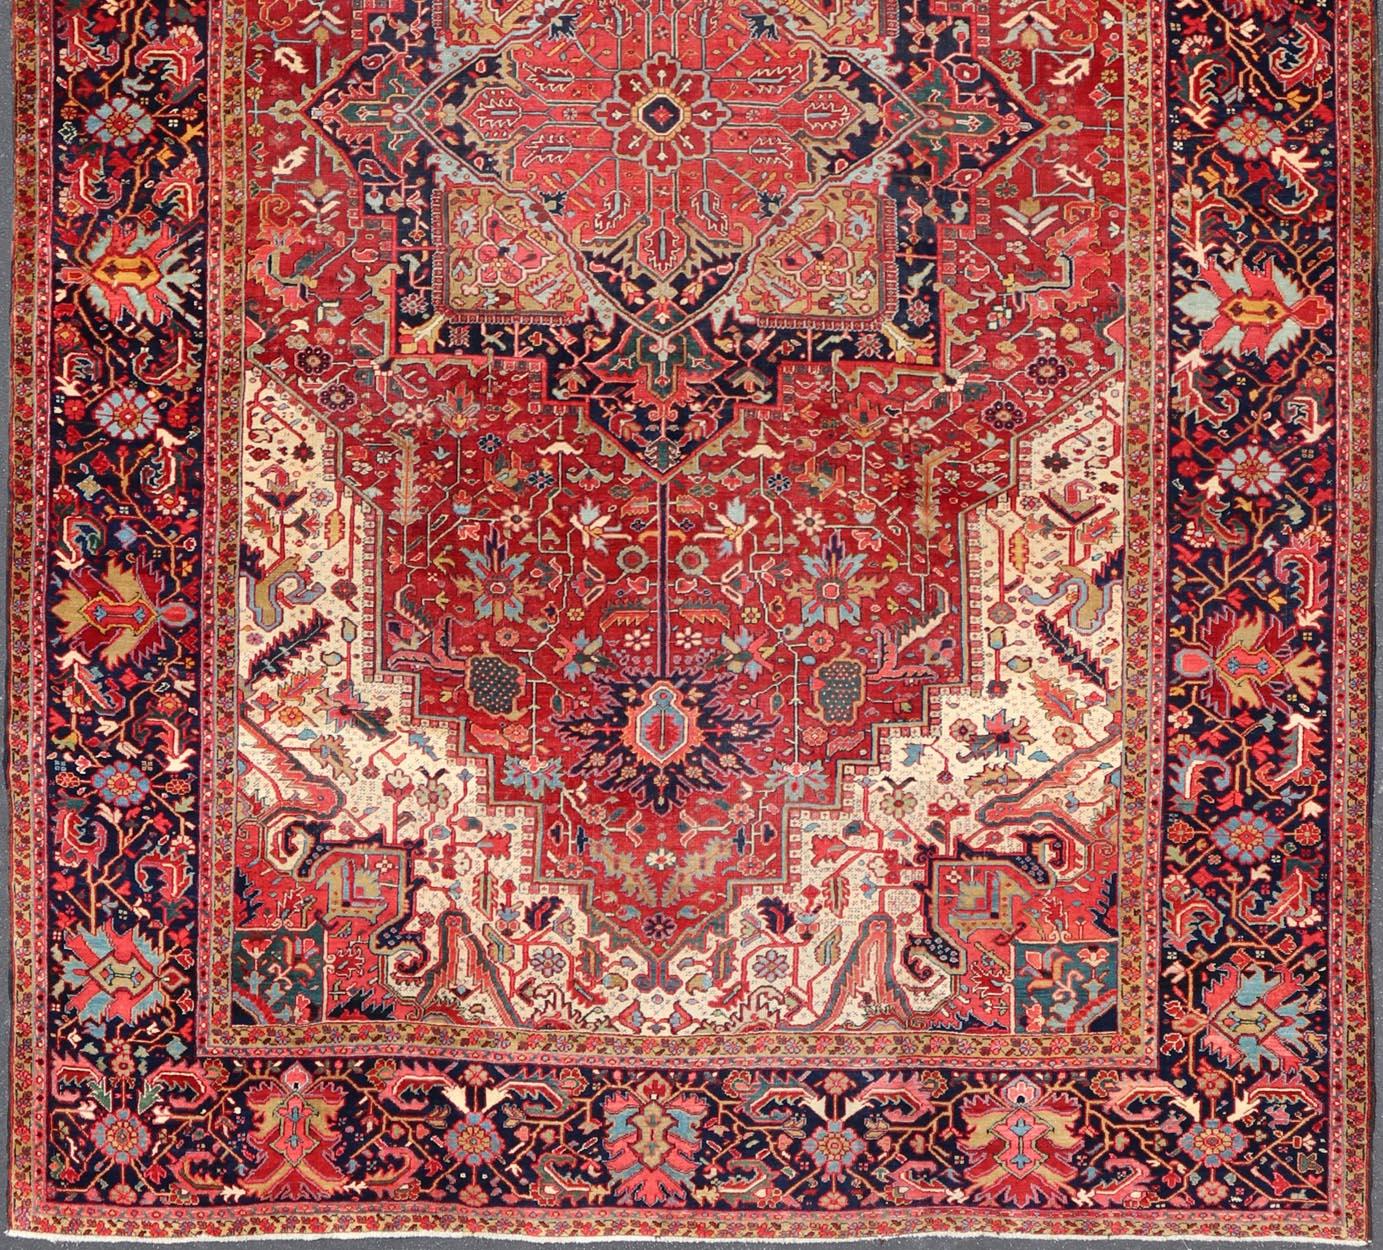 Hand-Knotted Richly Colored Large Antique Persian Heriz-Serapi Carpet with Geometric Design